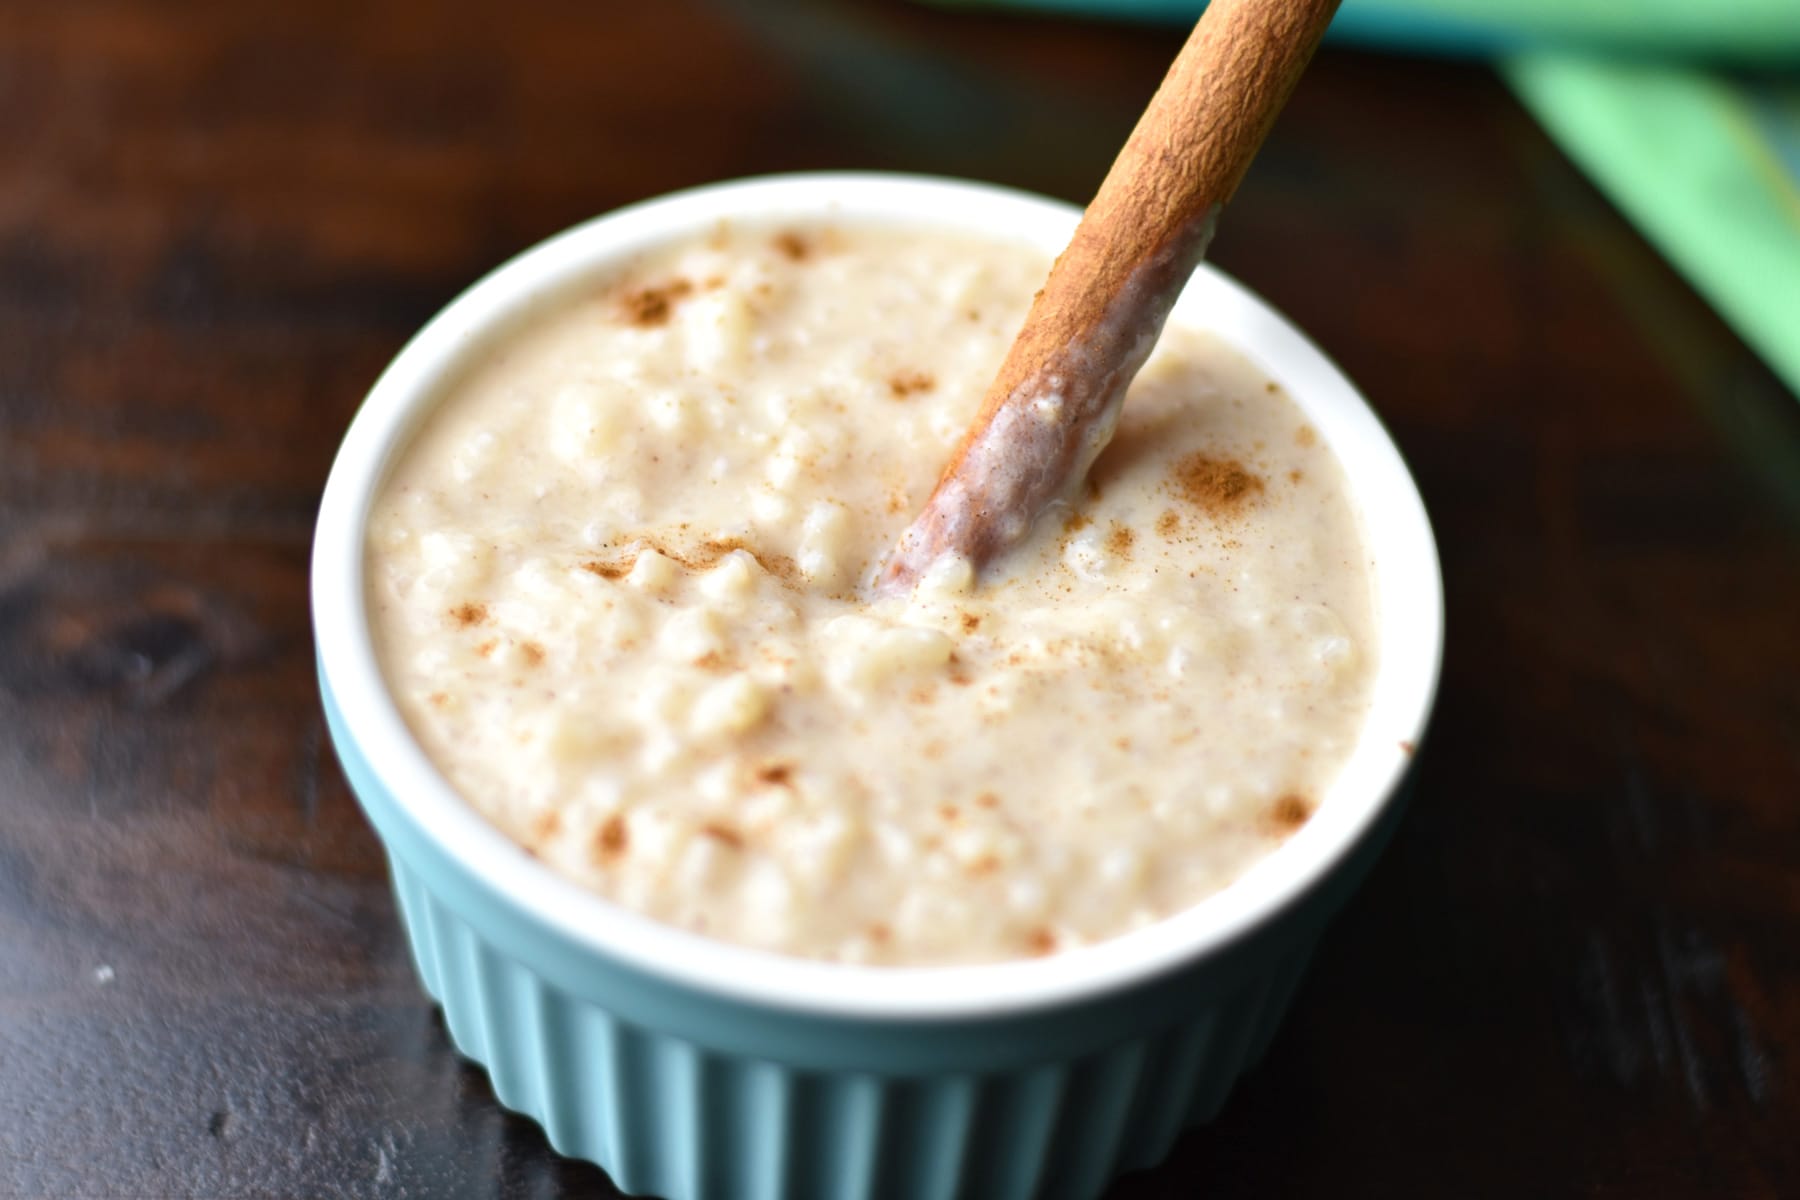 arroz con leche in small blue bowl with wooden spoon